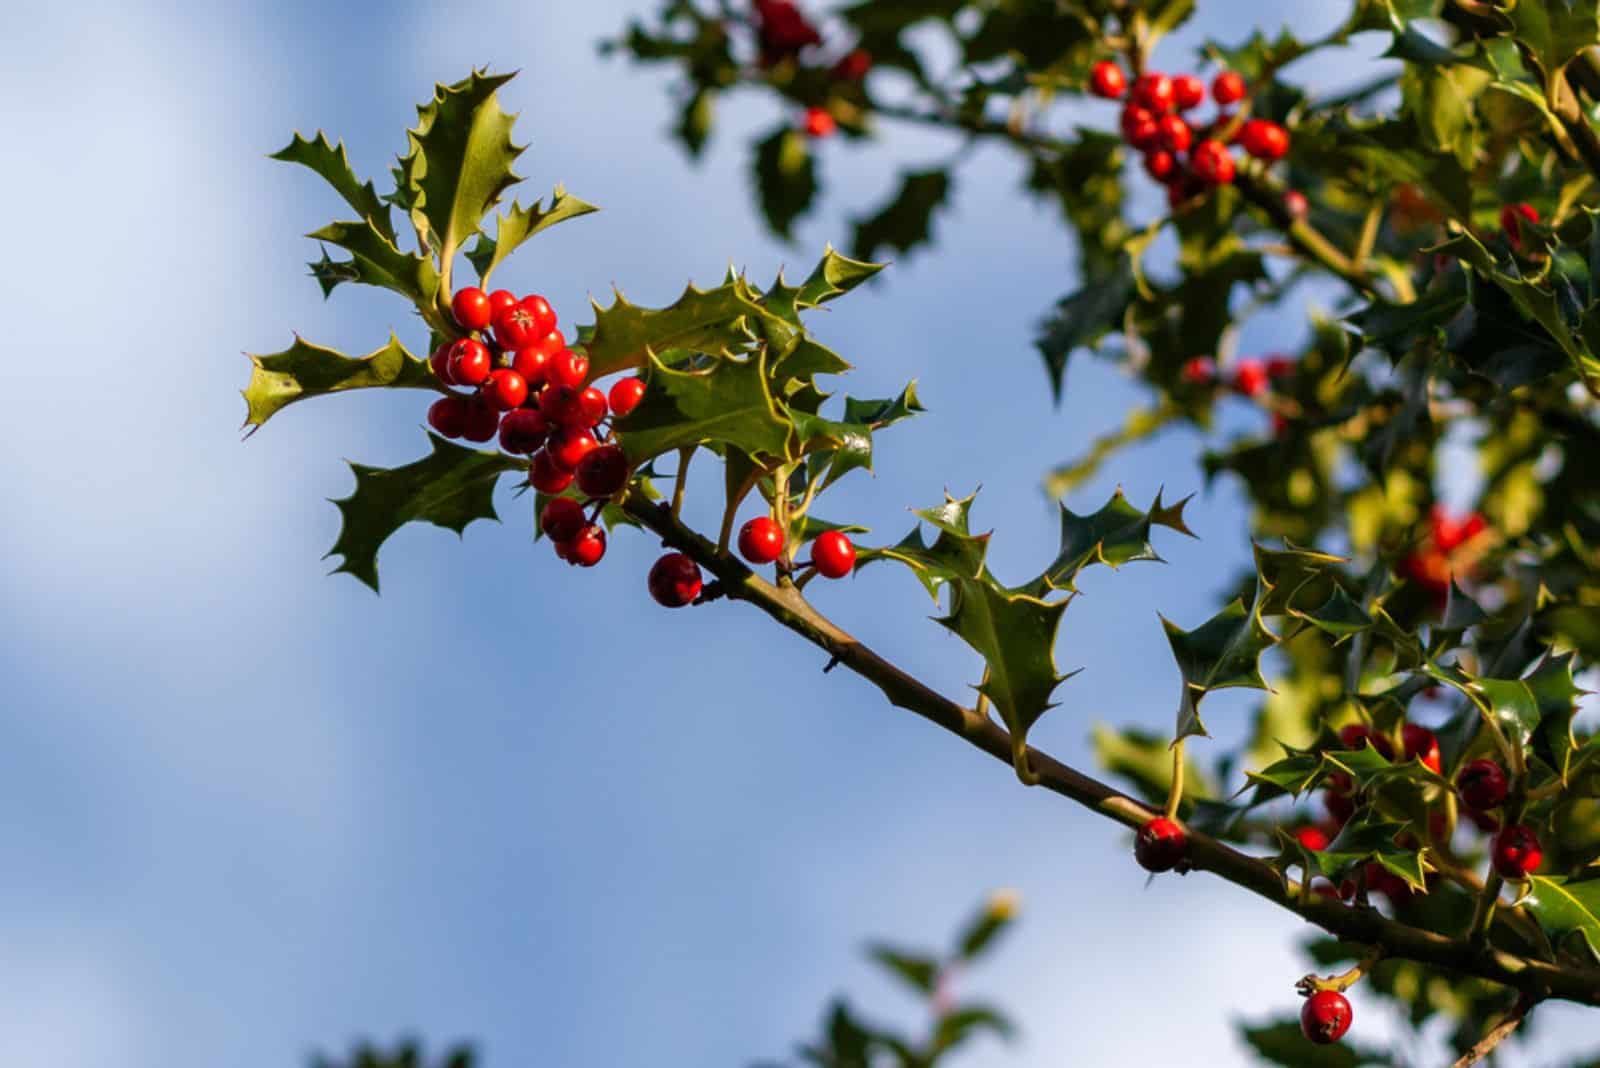 Branch of a holly tree with berries